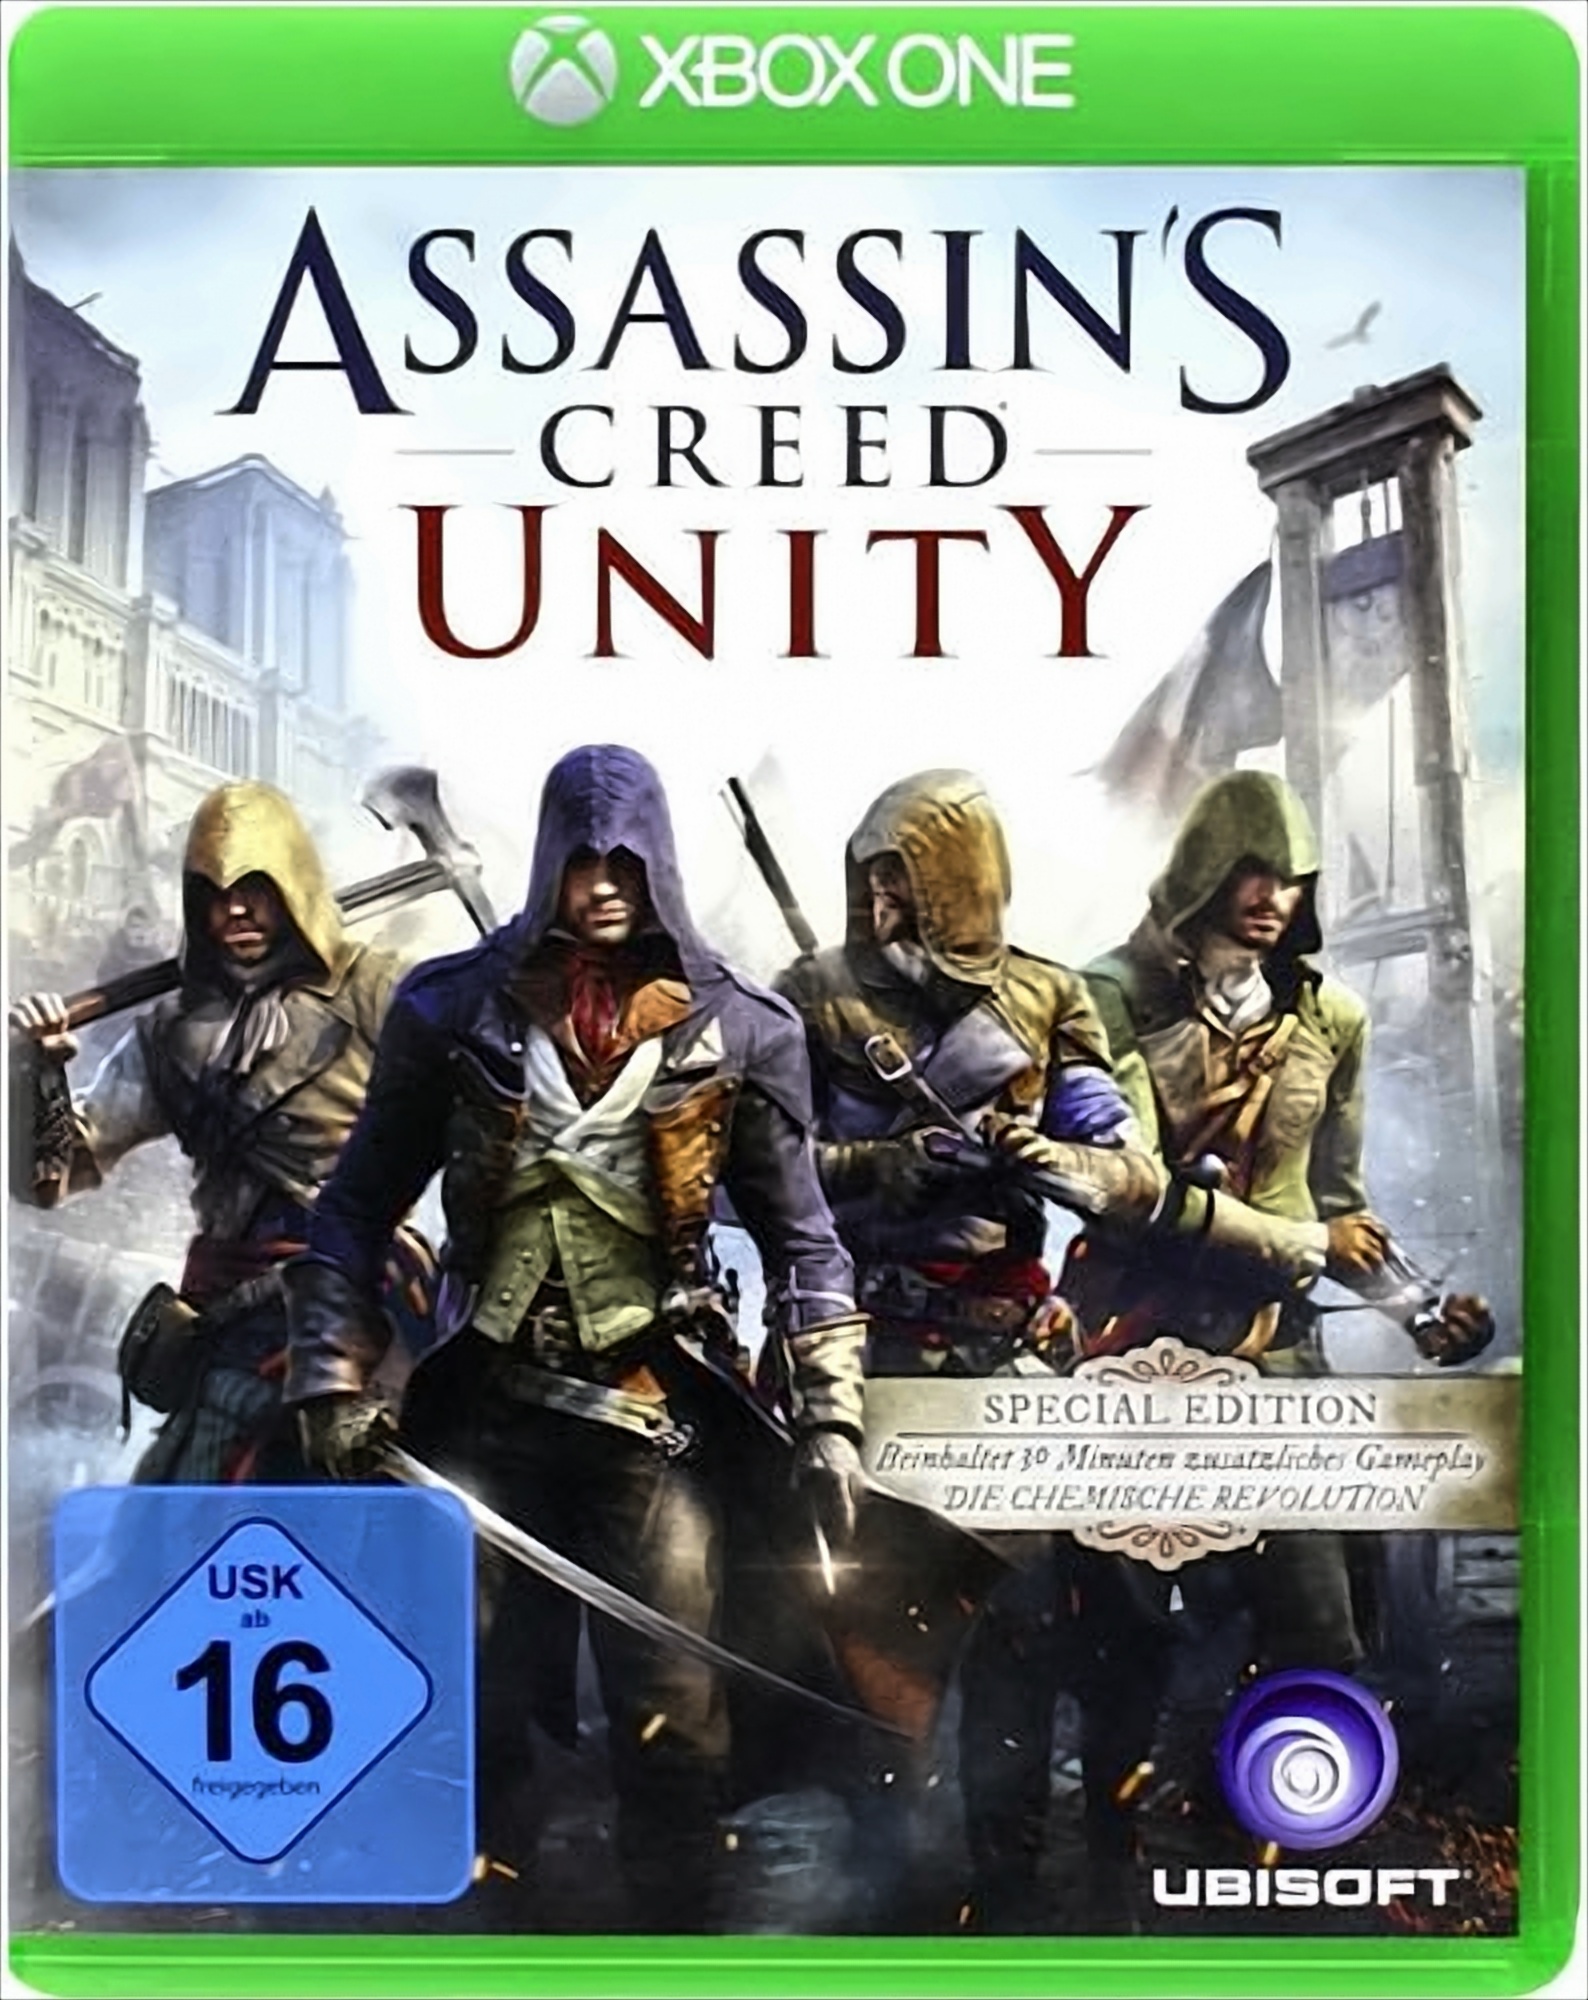 Assassin's Creed Unity - Special Edition - [Xbox One] von Ubisoft